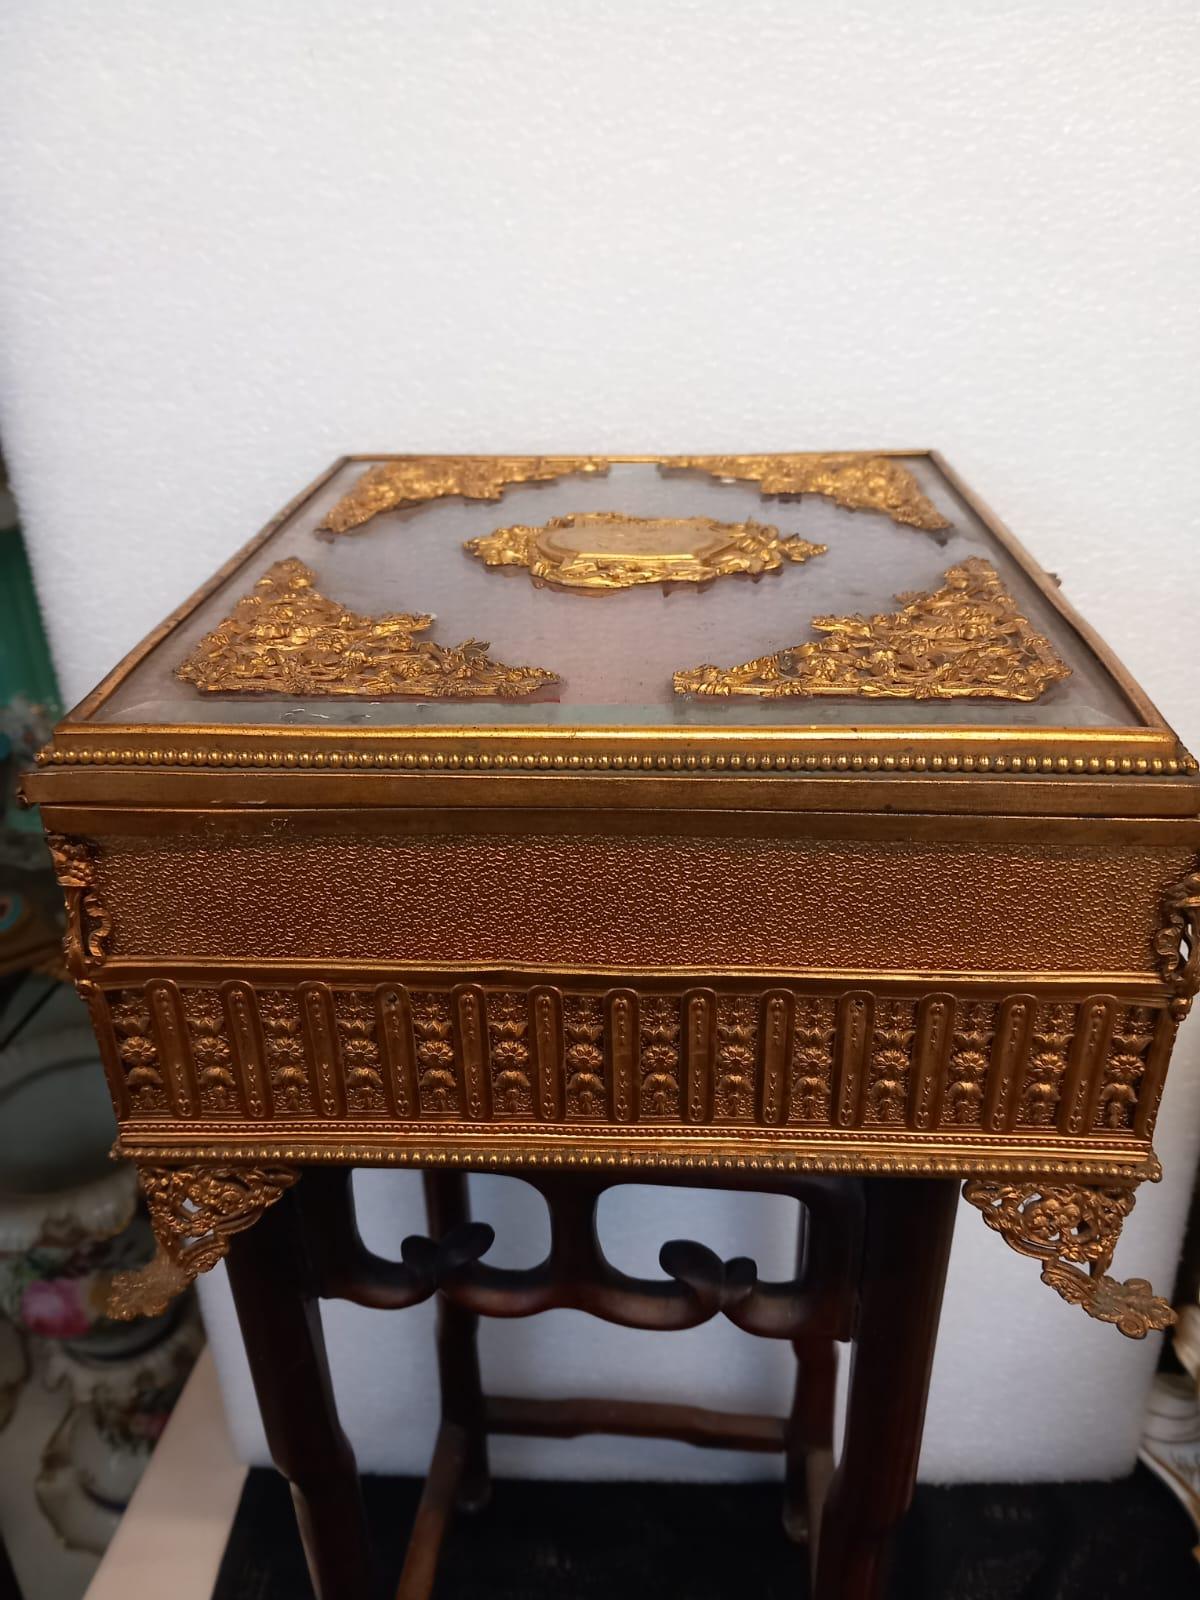 Napoleon III Palais Royal gilt bronze and mother of pearl jewellery casket or trinket box For Sale